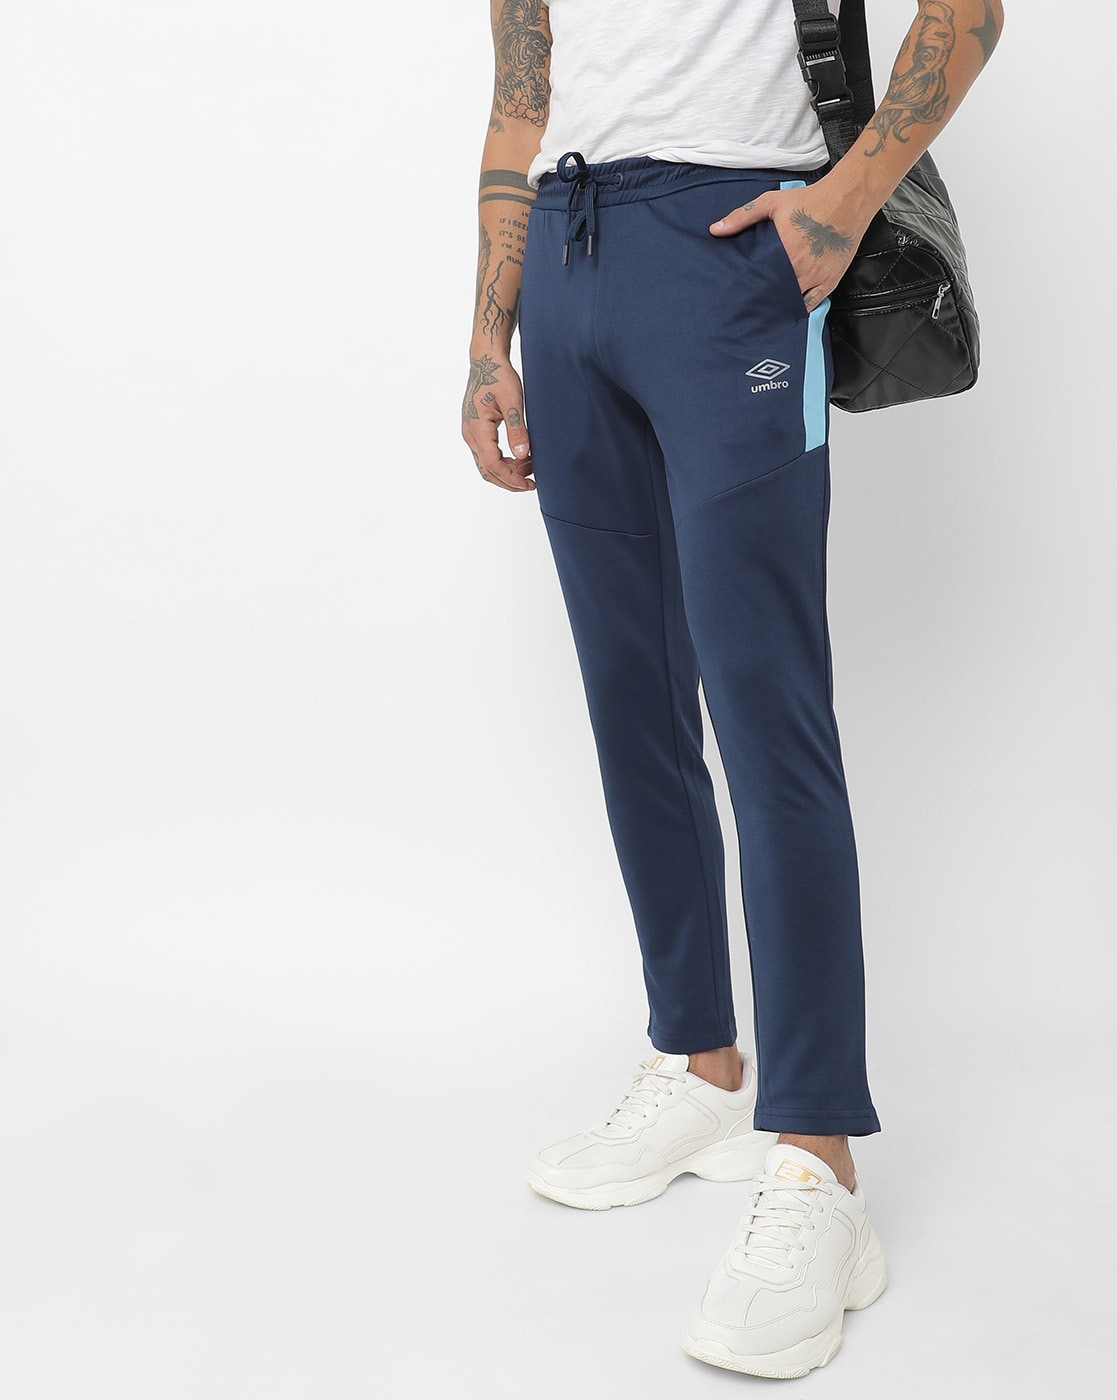 Buy Navy Blue Track Pants for by UMBRO Online | Ajio.com